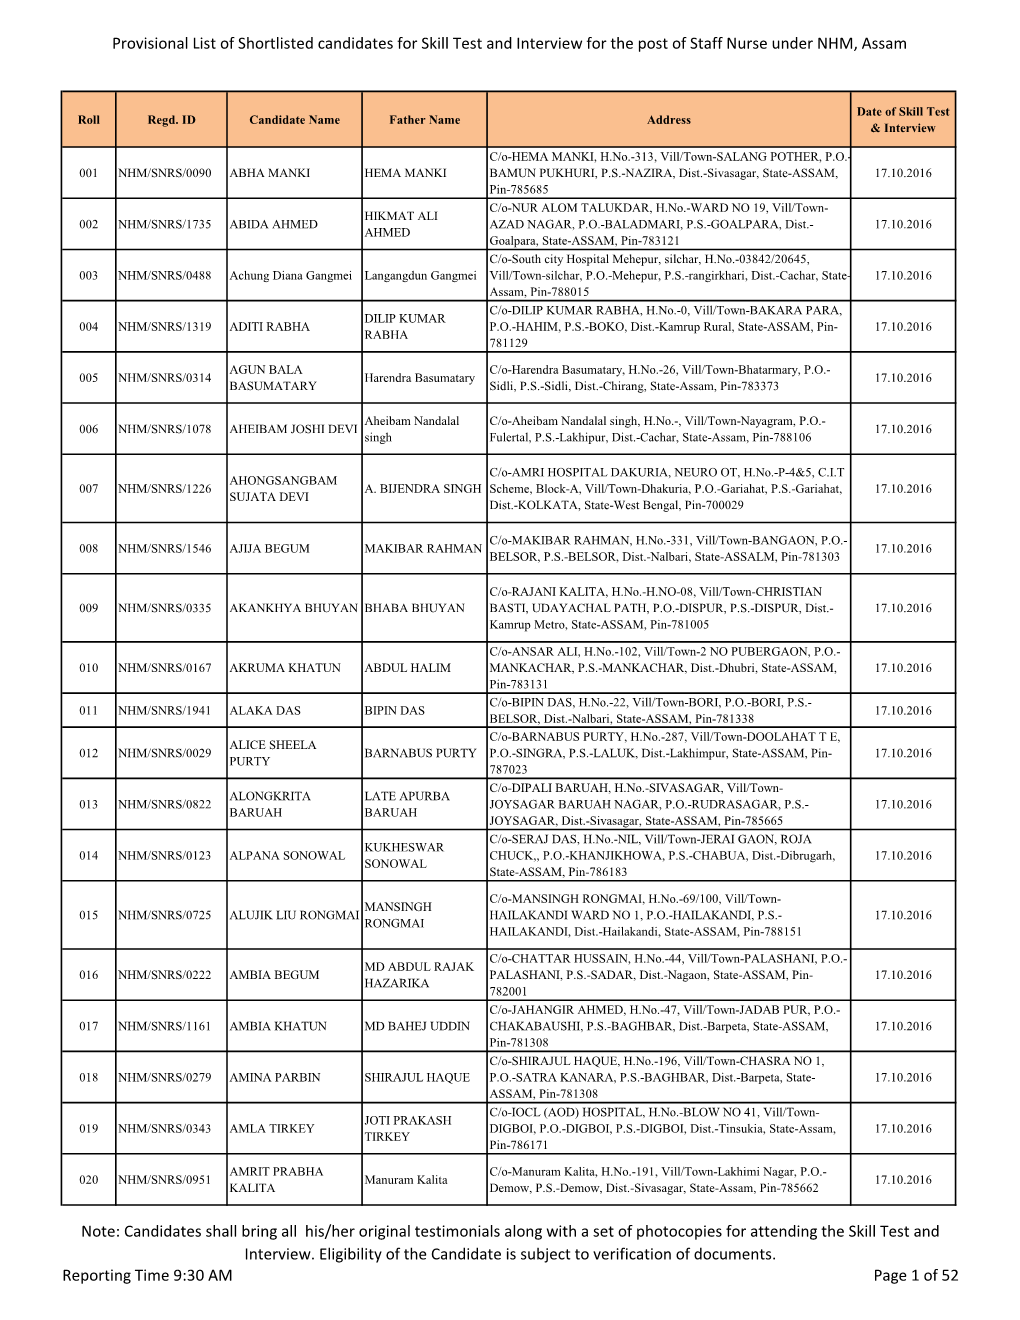 Provisional List of Shortlisted Candidates for Skill Test and Interview for the Post of Staff Nurse Under NHM, Assam